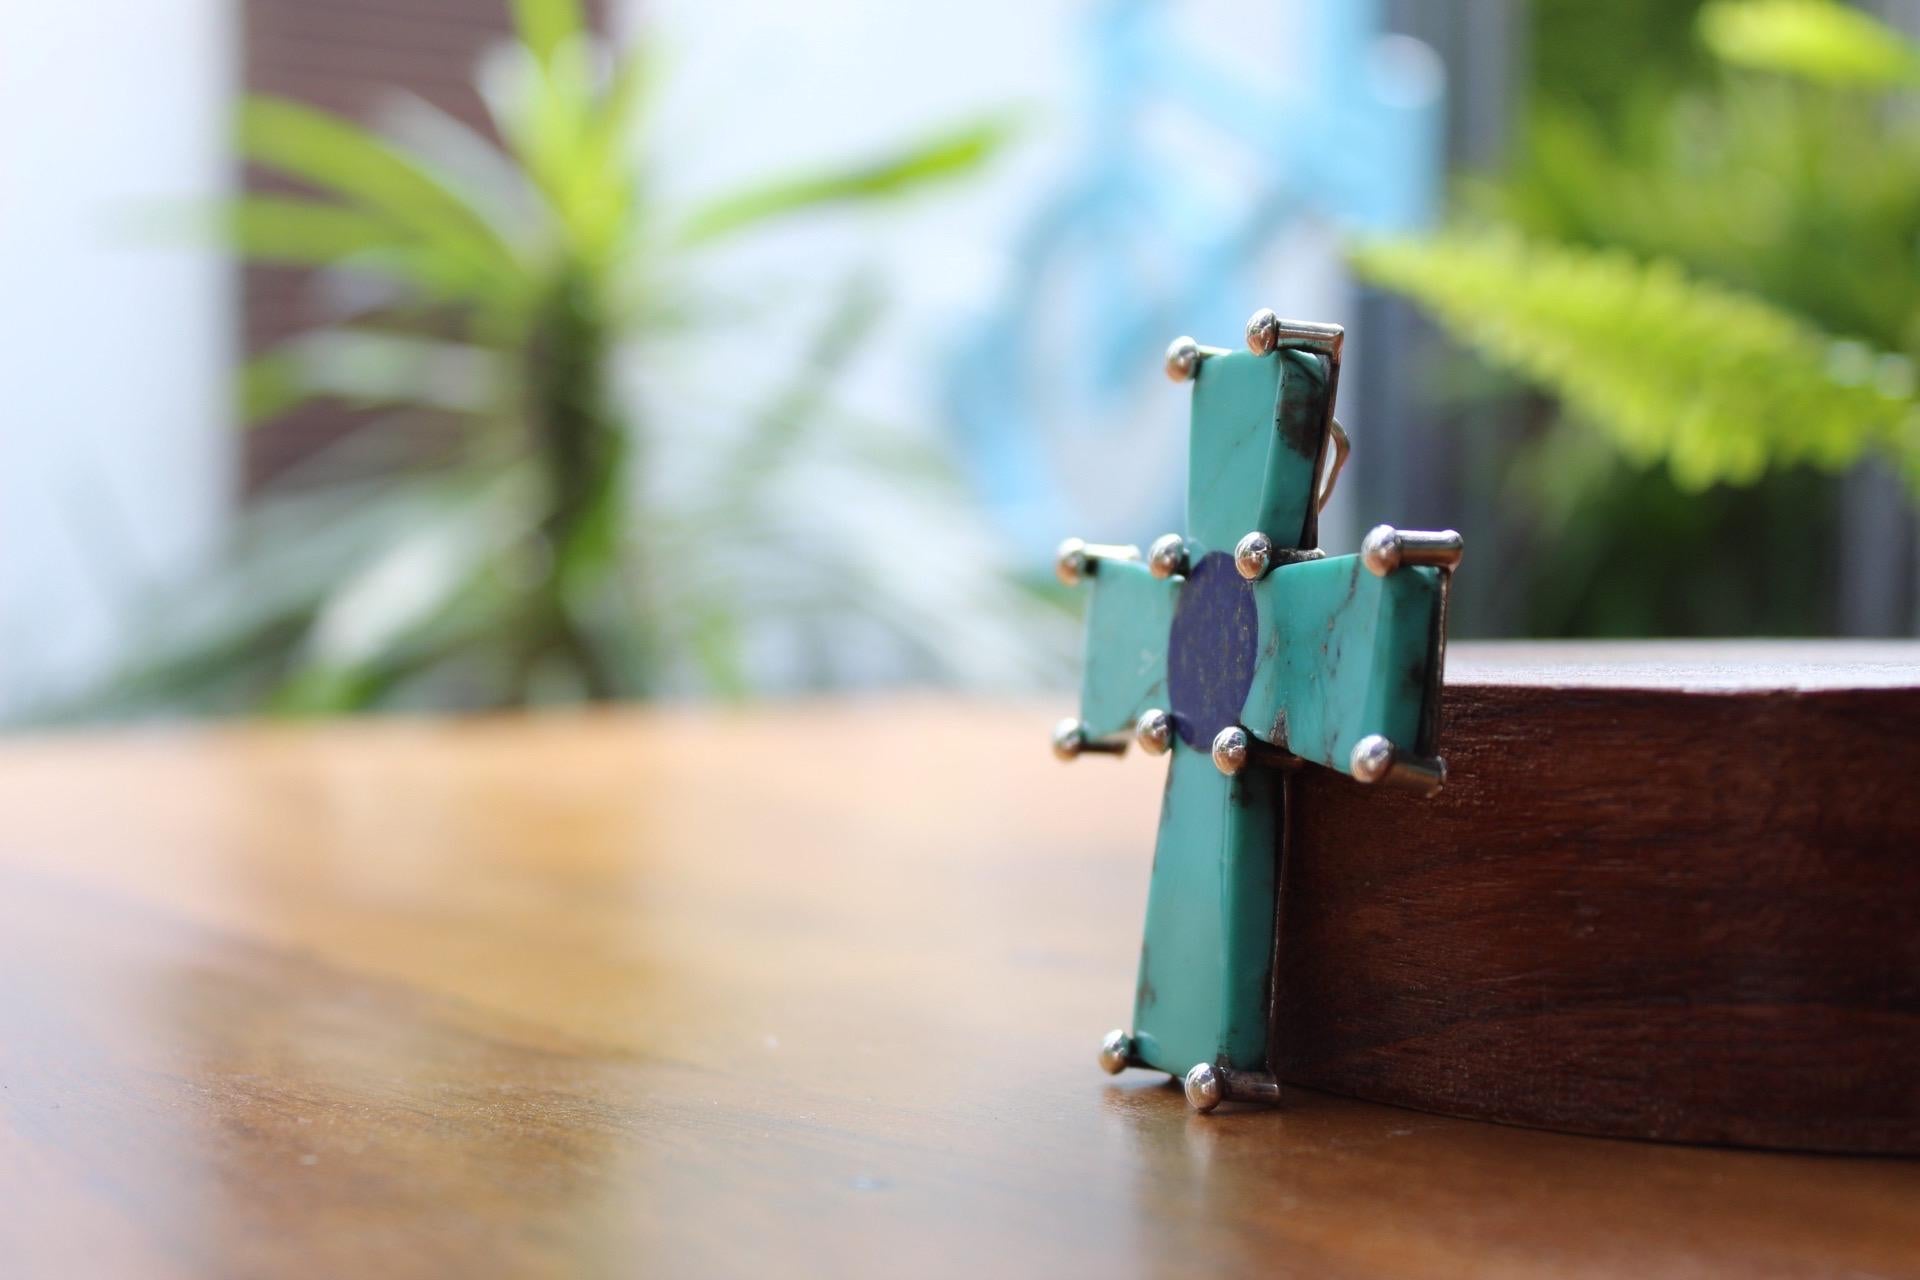 Los Castillo silver, Turquoise & Lapis Lazuli Pin cross, foy your consideration, a rare piece from Los Castillo mixed with two beautiful stones. A bit of Mexican modernism.